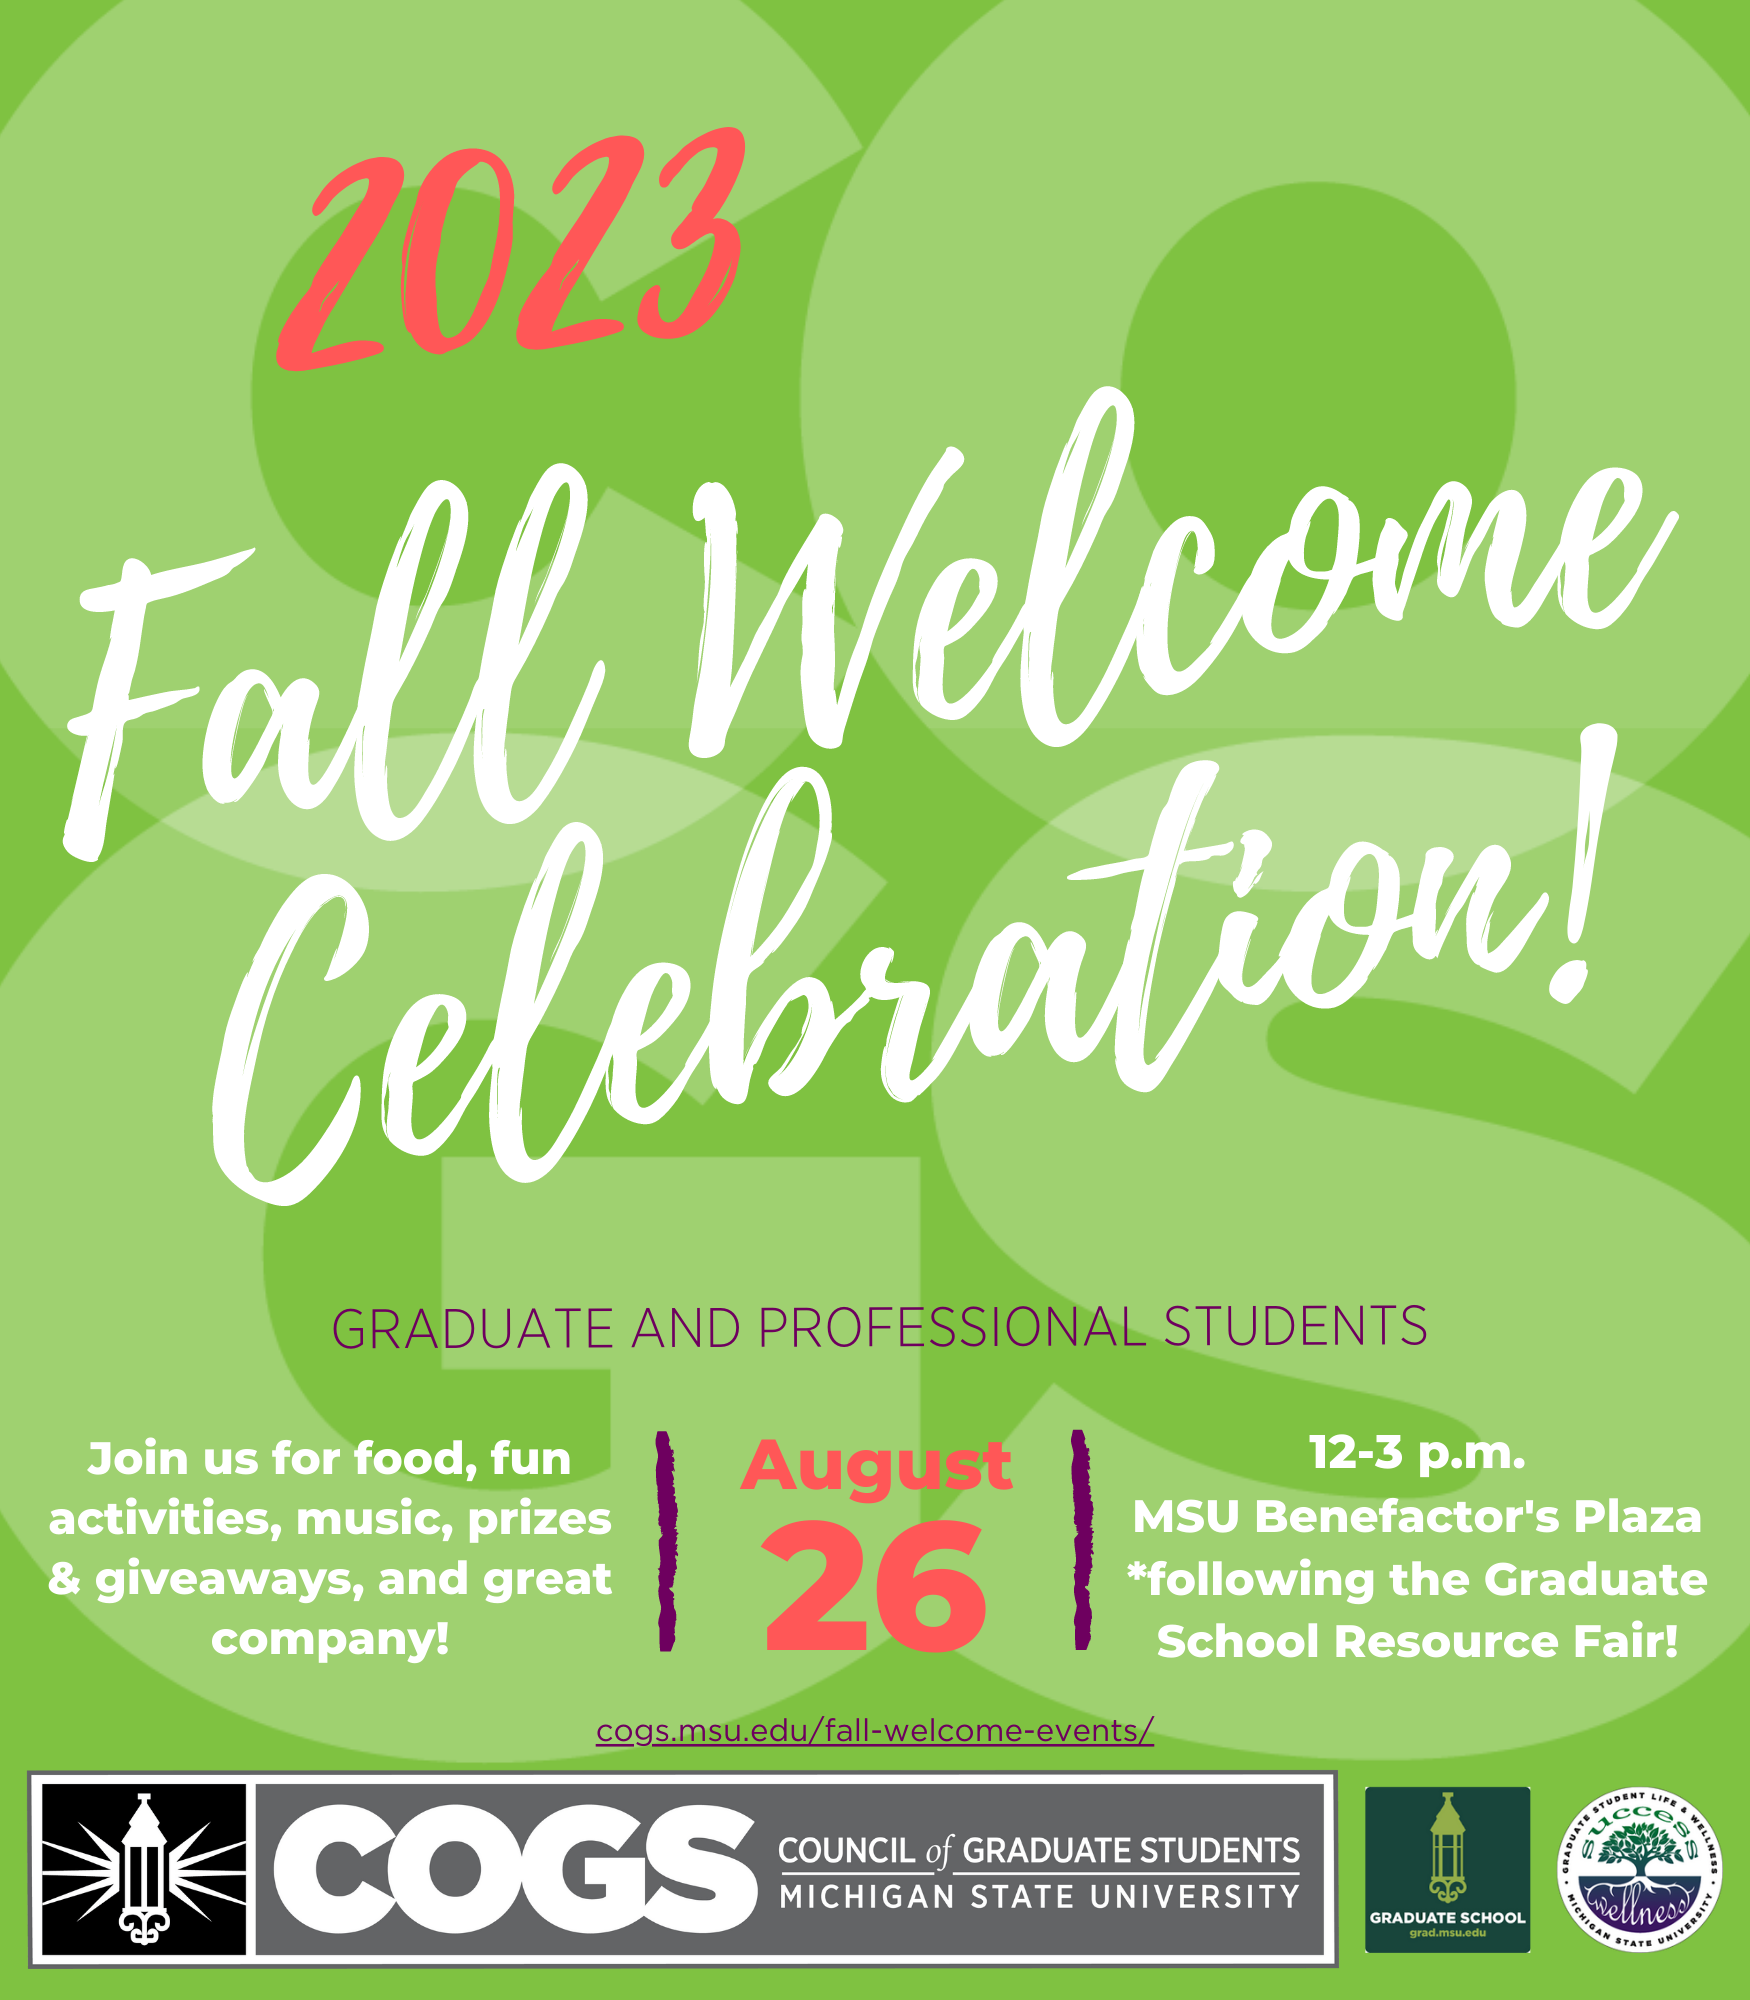 2023 COGS Fall Welcome Celebration save the date poster, August 26, 2023